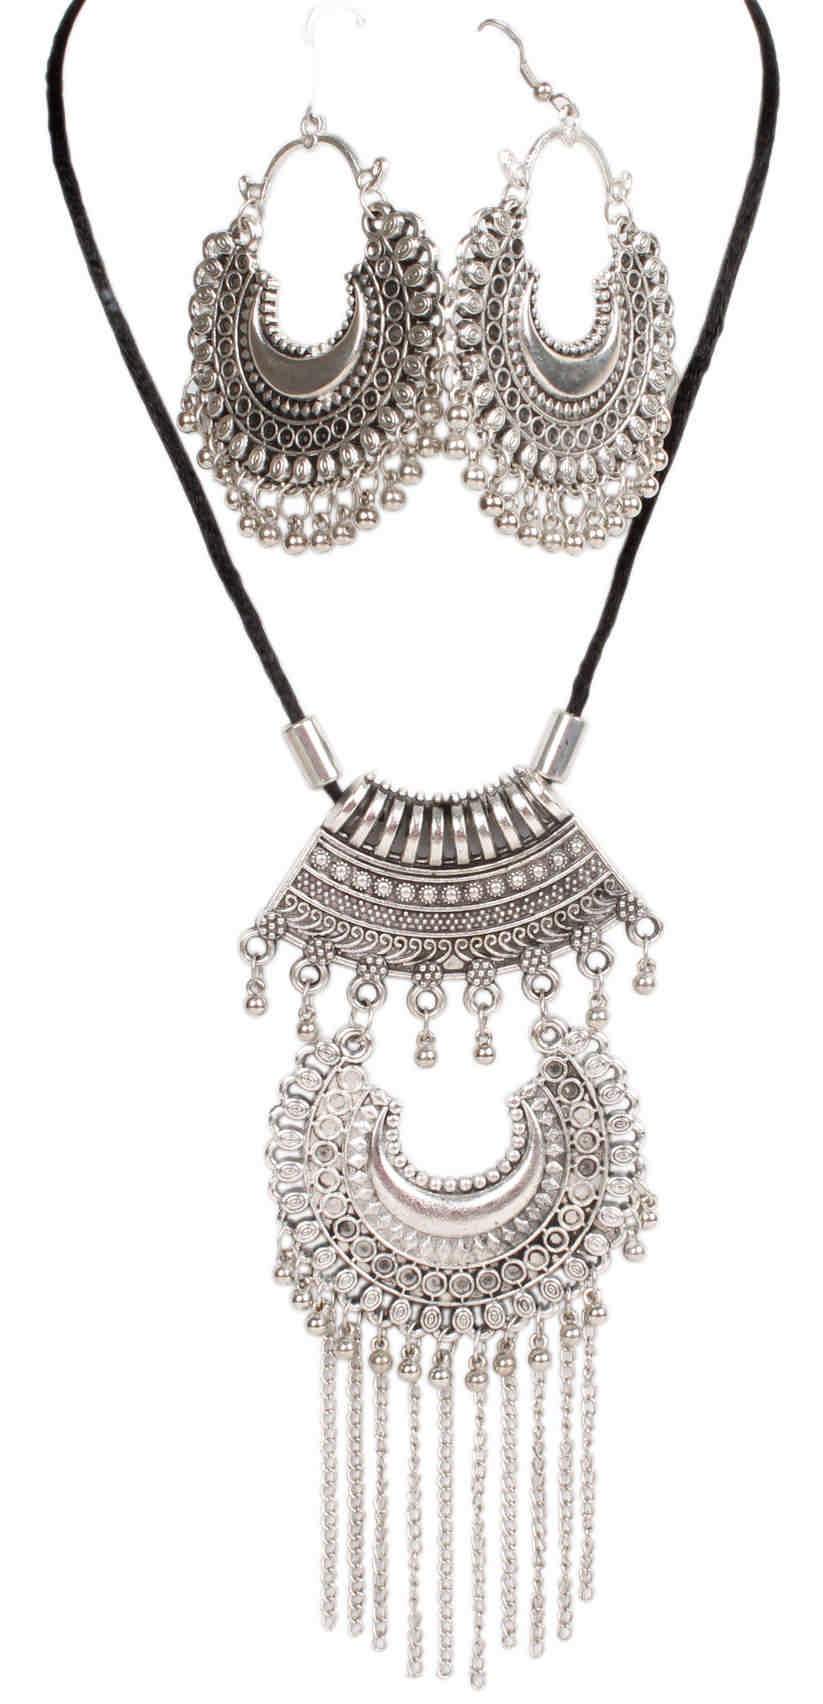 Indian Petals Retro style Afgani design Metal Pendant Imitation Fashion Oxidised Necklace Set with Tassels for Girls and Ladies - #Indian Petals